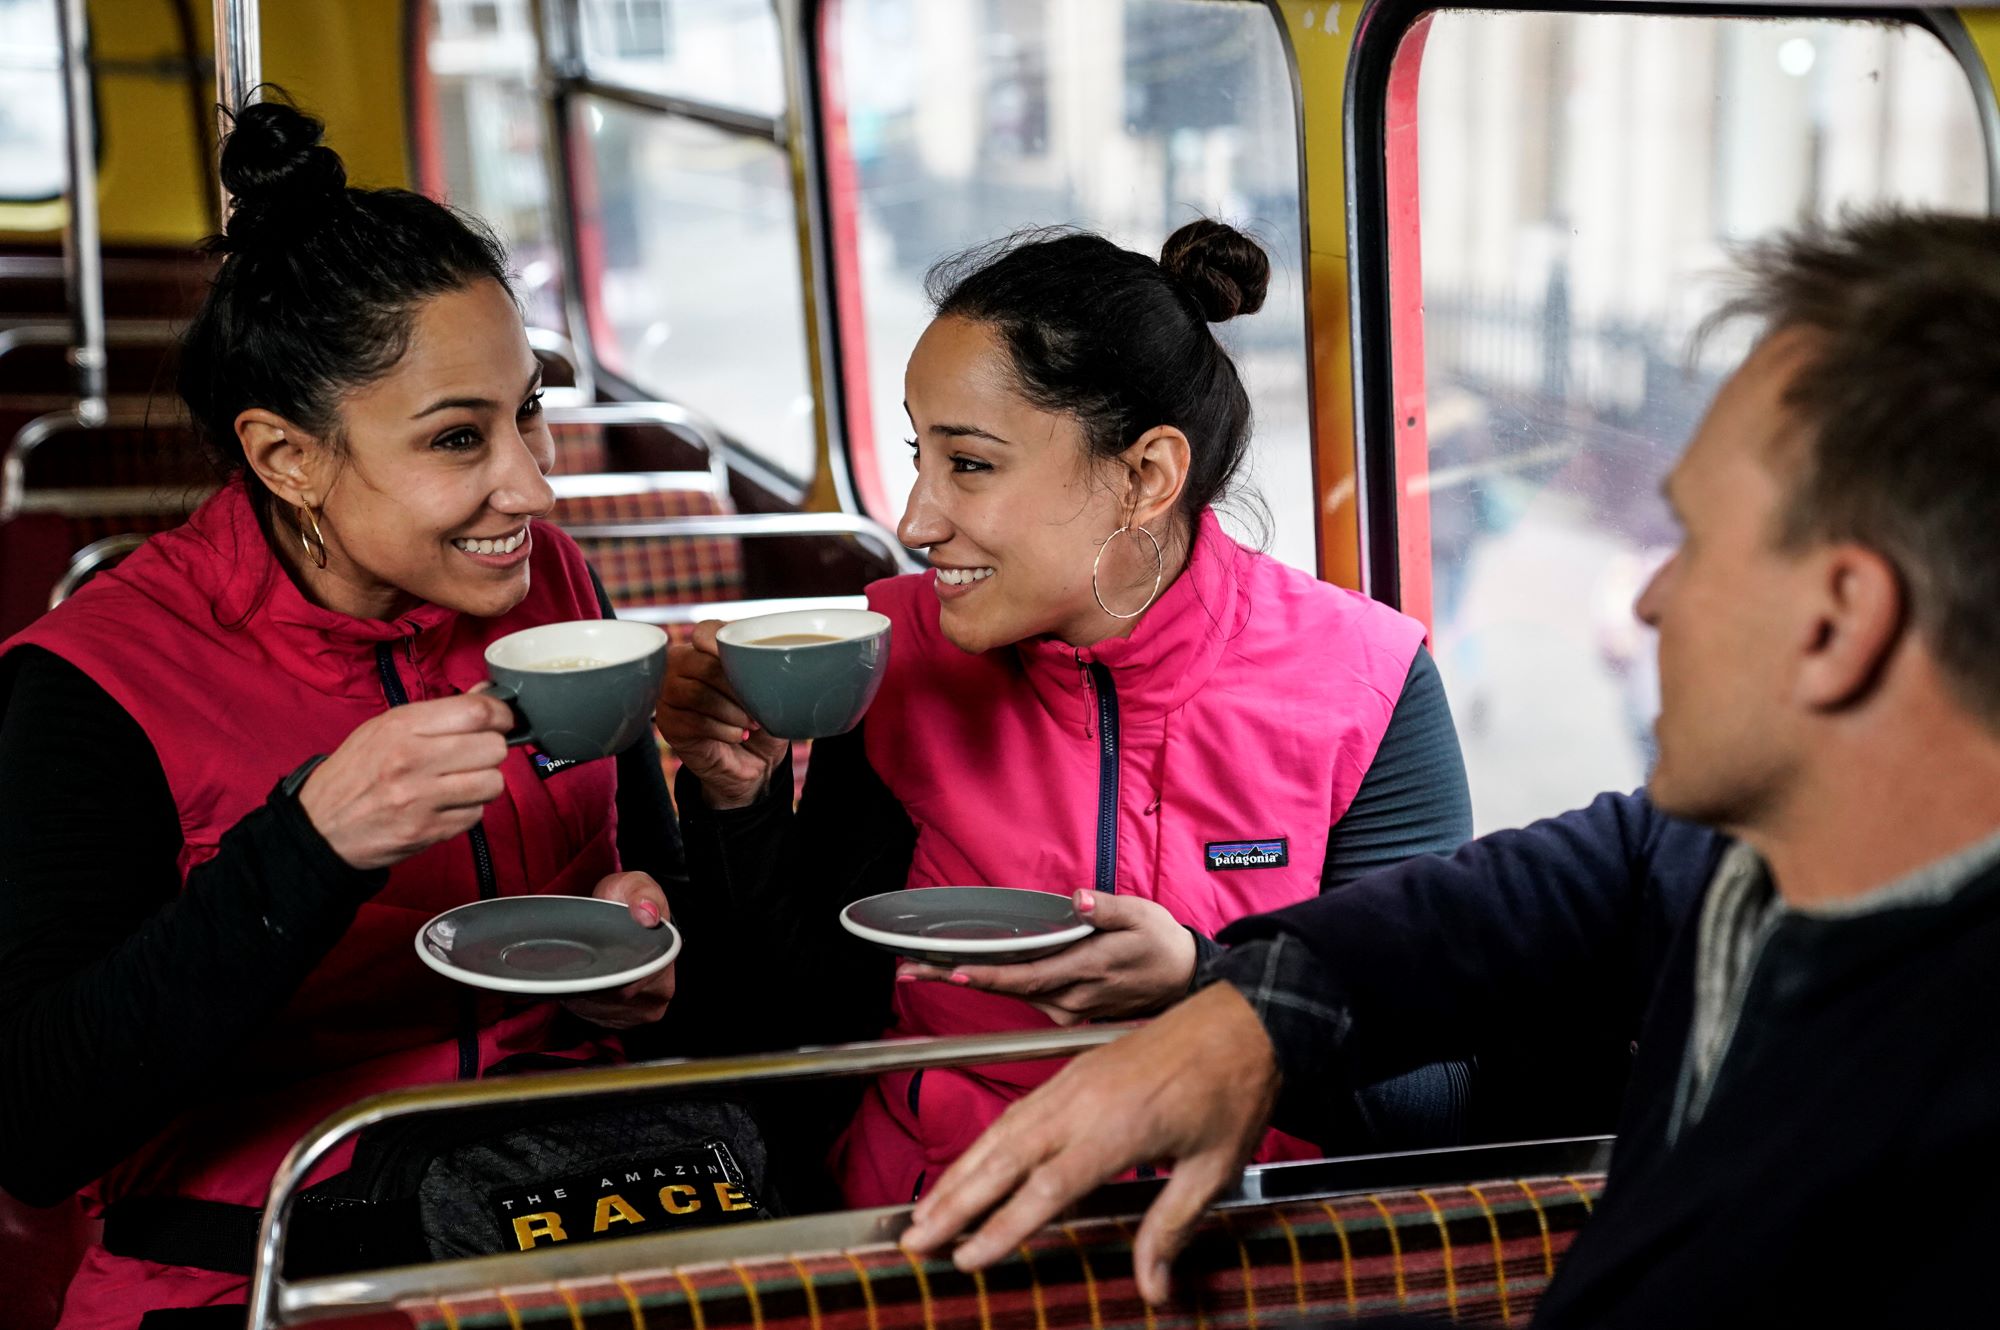 'The Amazing Race' Season 33 stars Lulu and Lala Gonzalez talk with host Phil Keoghan at a pit stop. Lulu and Lala wear pink vests over black long-sleeved shirts, and they sip cups of tea. Keoghan wears a black  coat.